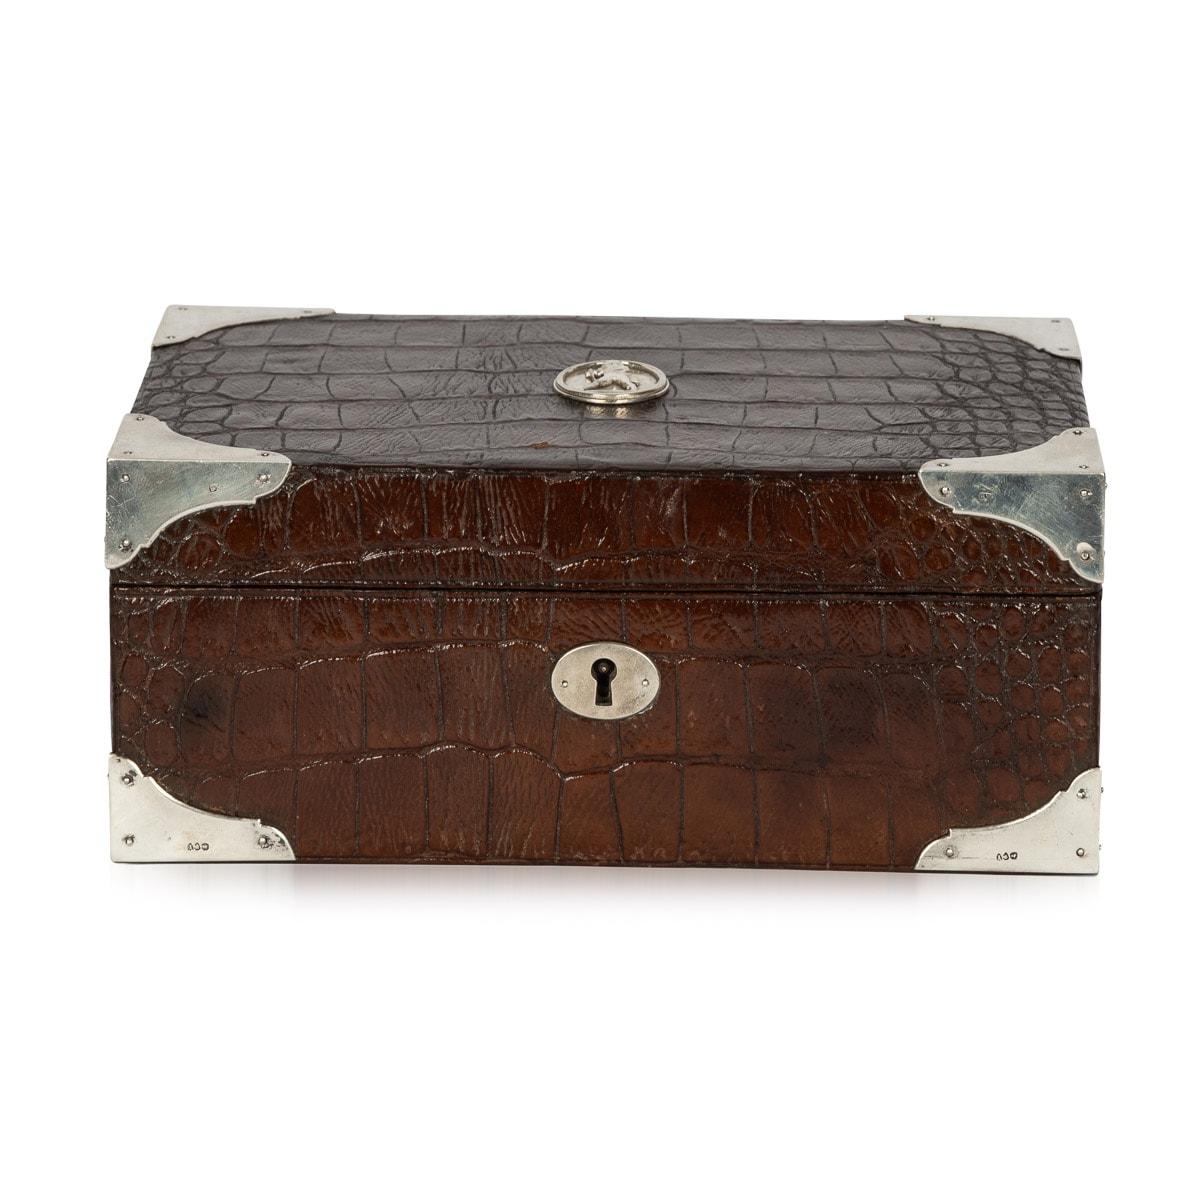 Antique 19th Century crocodile leather cigar humidor. This box features a solid silver cartouche of a top hat man on the centre top and solid silver corner protectors which wrap around the box. The inside is lined with cedar wood. The cigar box is